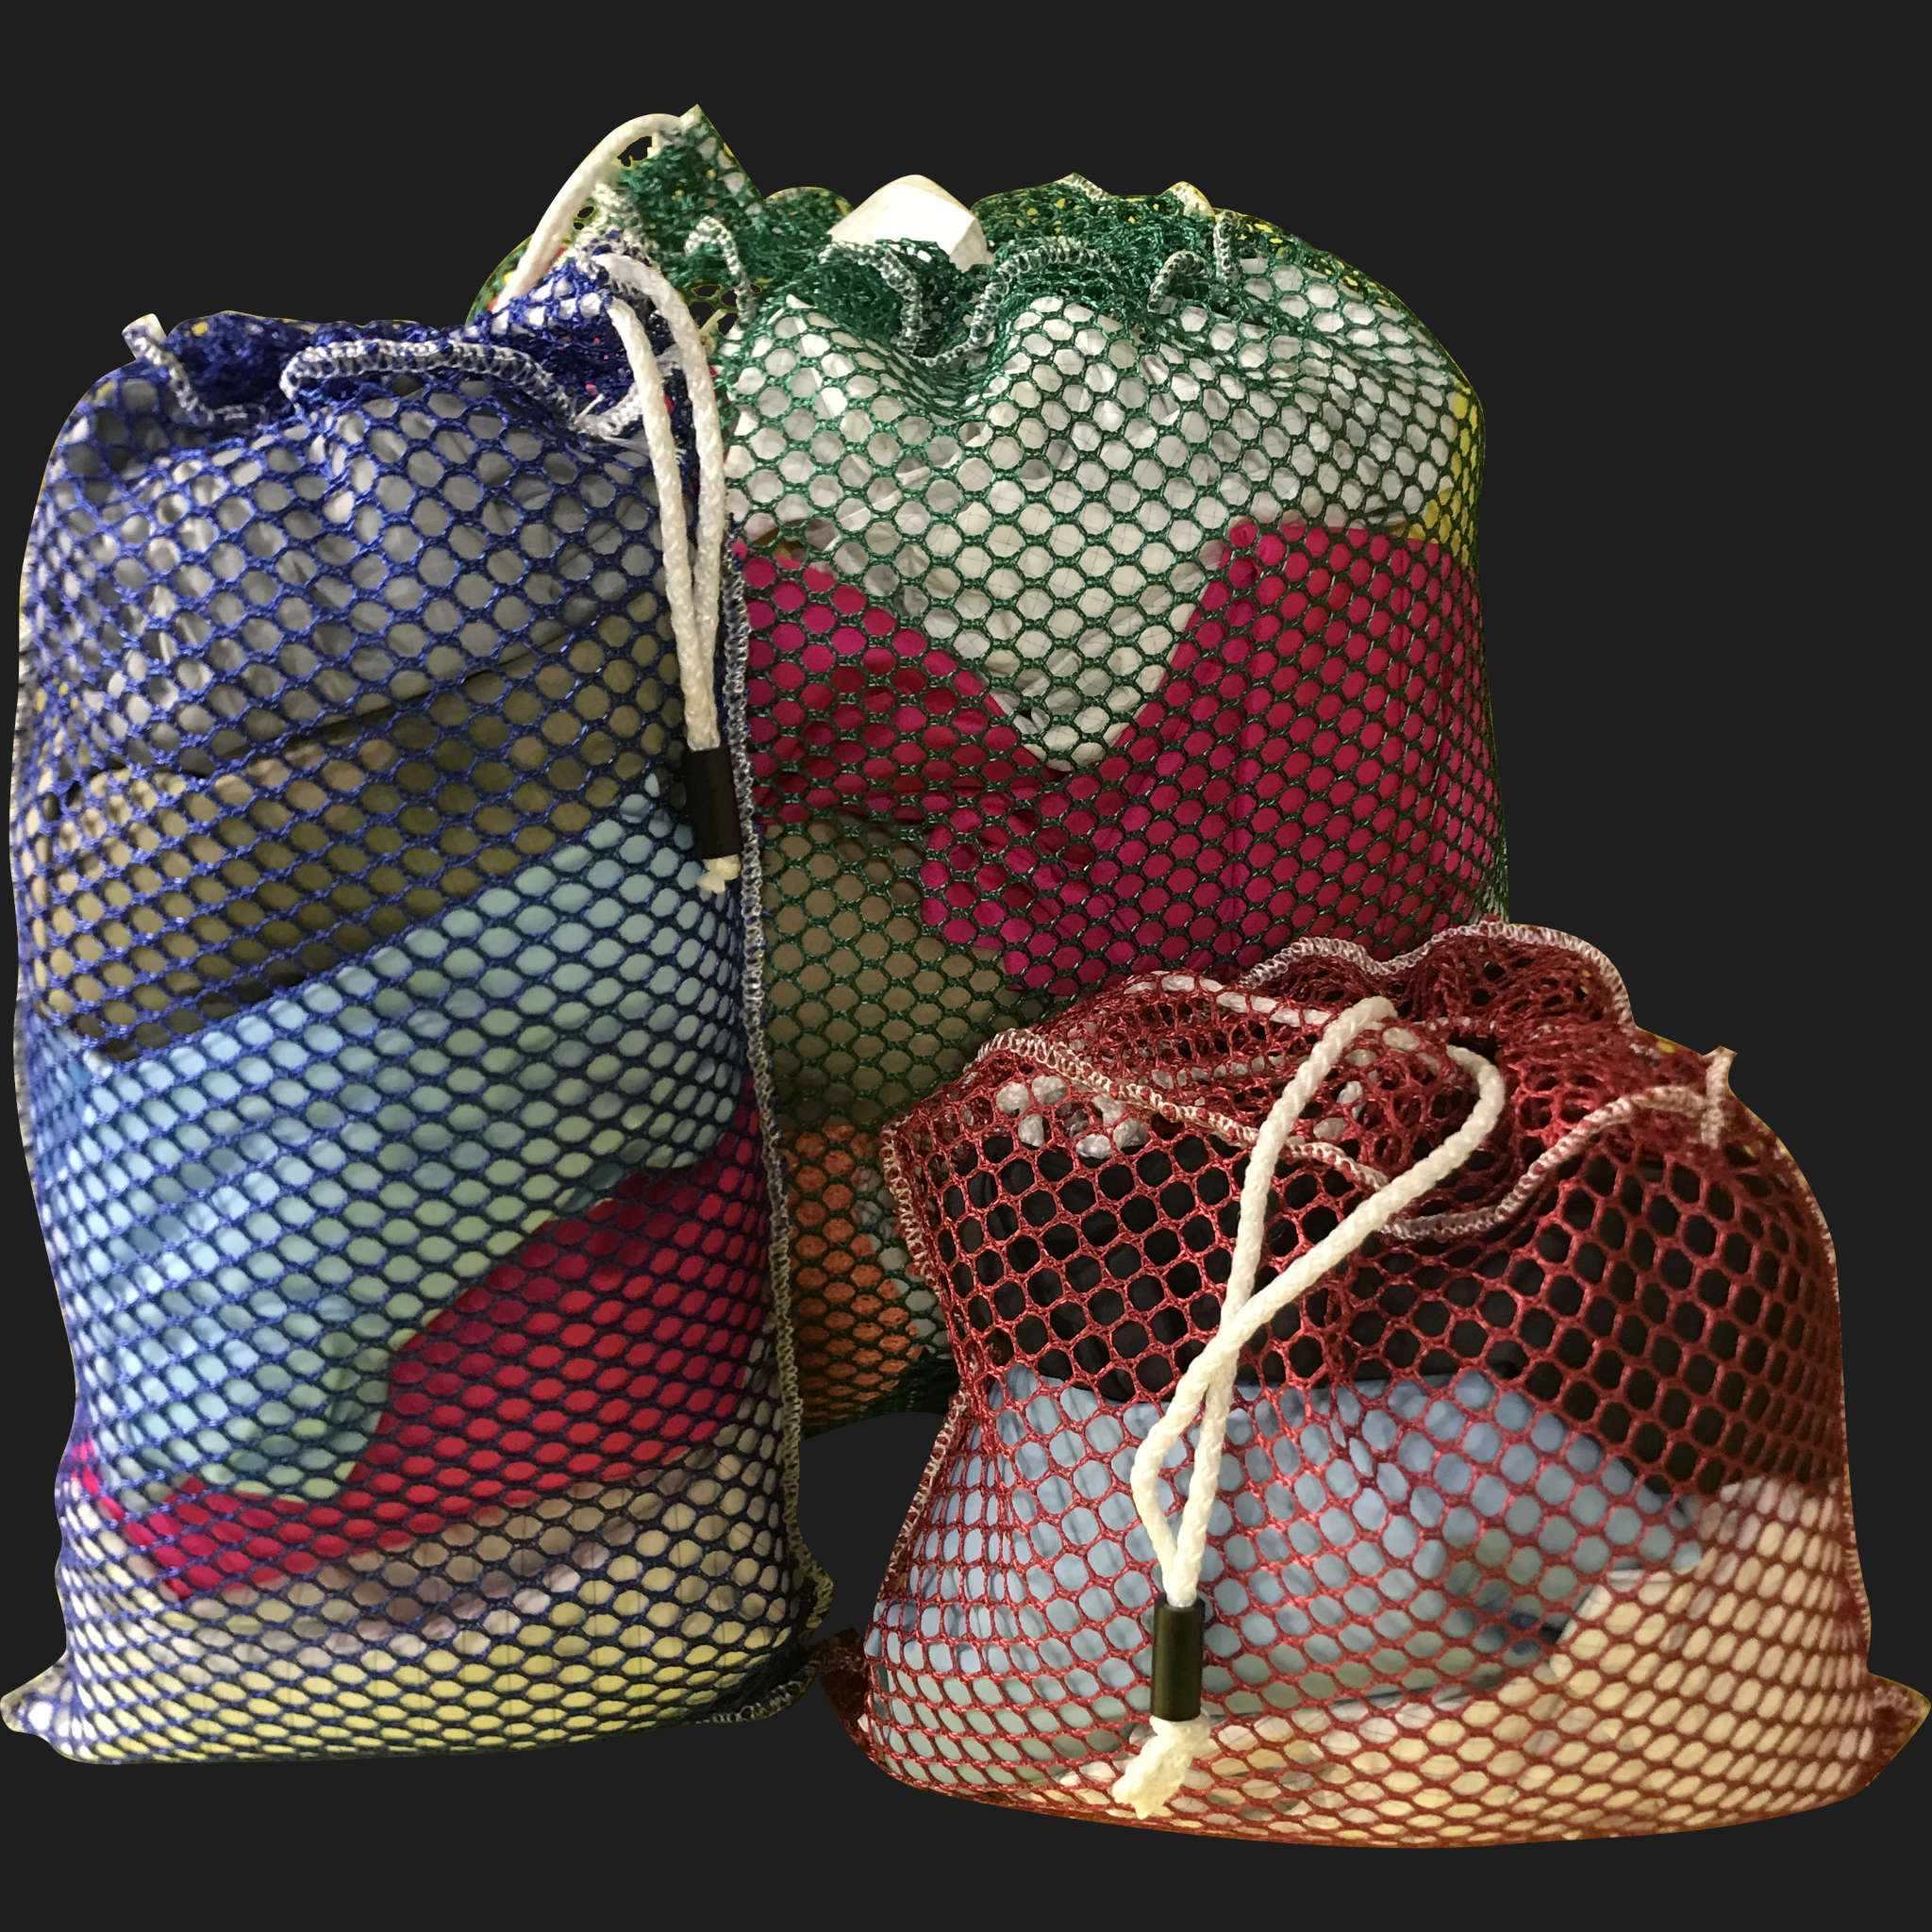 56" x 84" Customized Mesh-Net-Laundry Bags Heavy Duty with Cord and barrellock closure